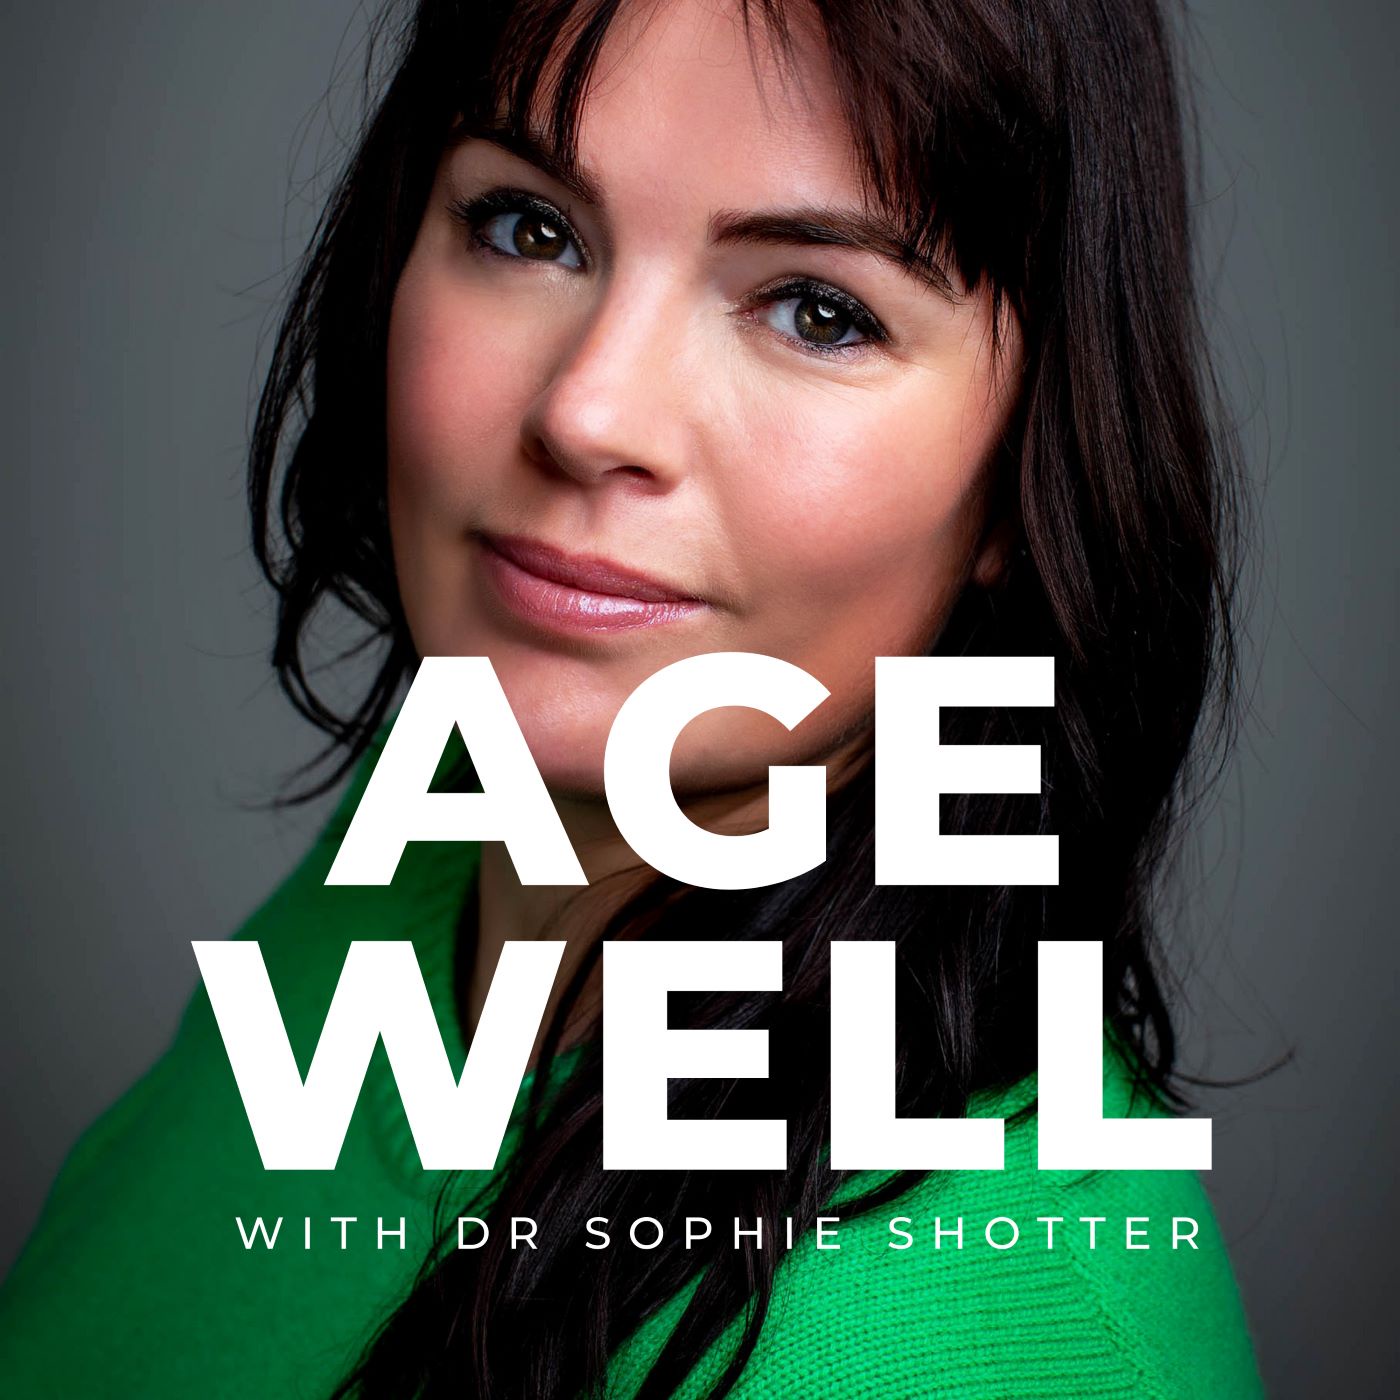 Age Well with Dr Sophie Shotter: NOW LIVE!